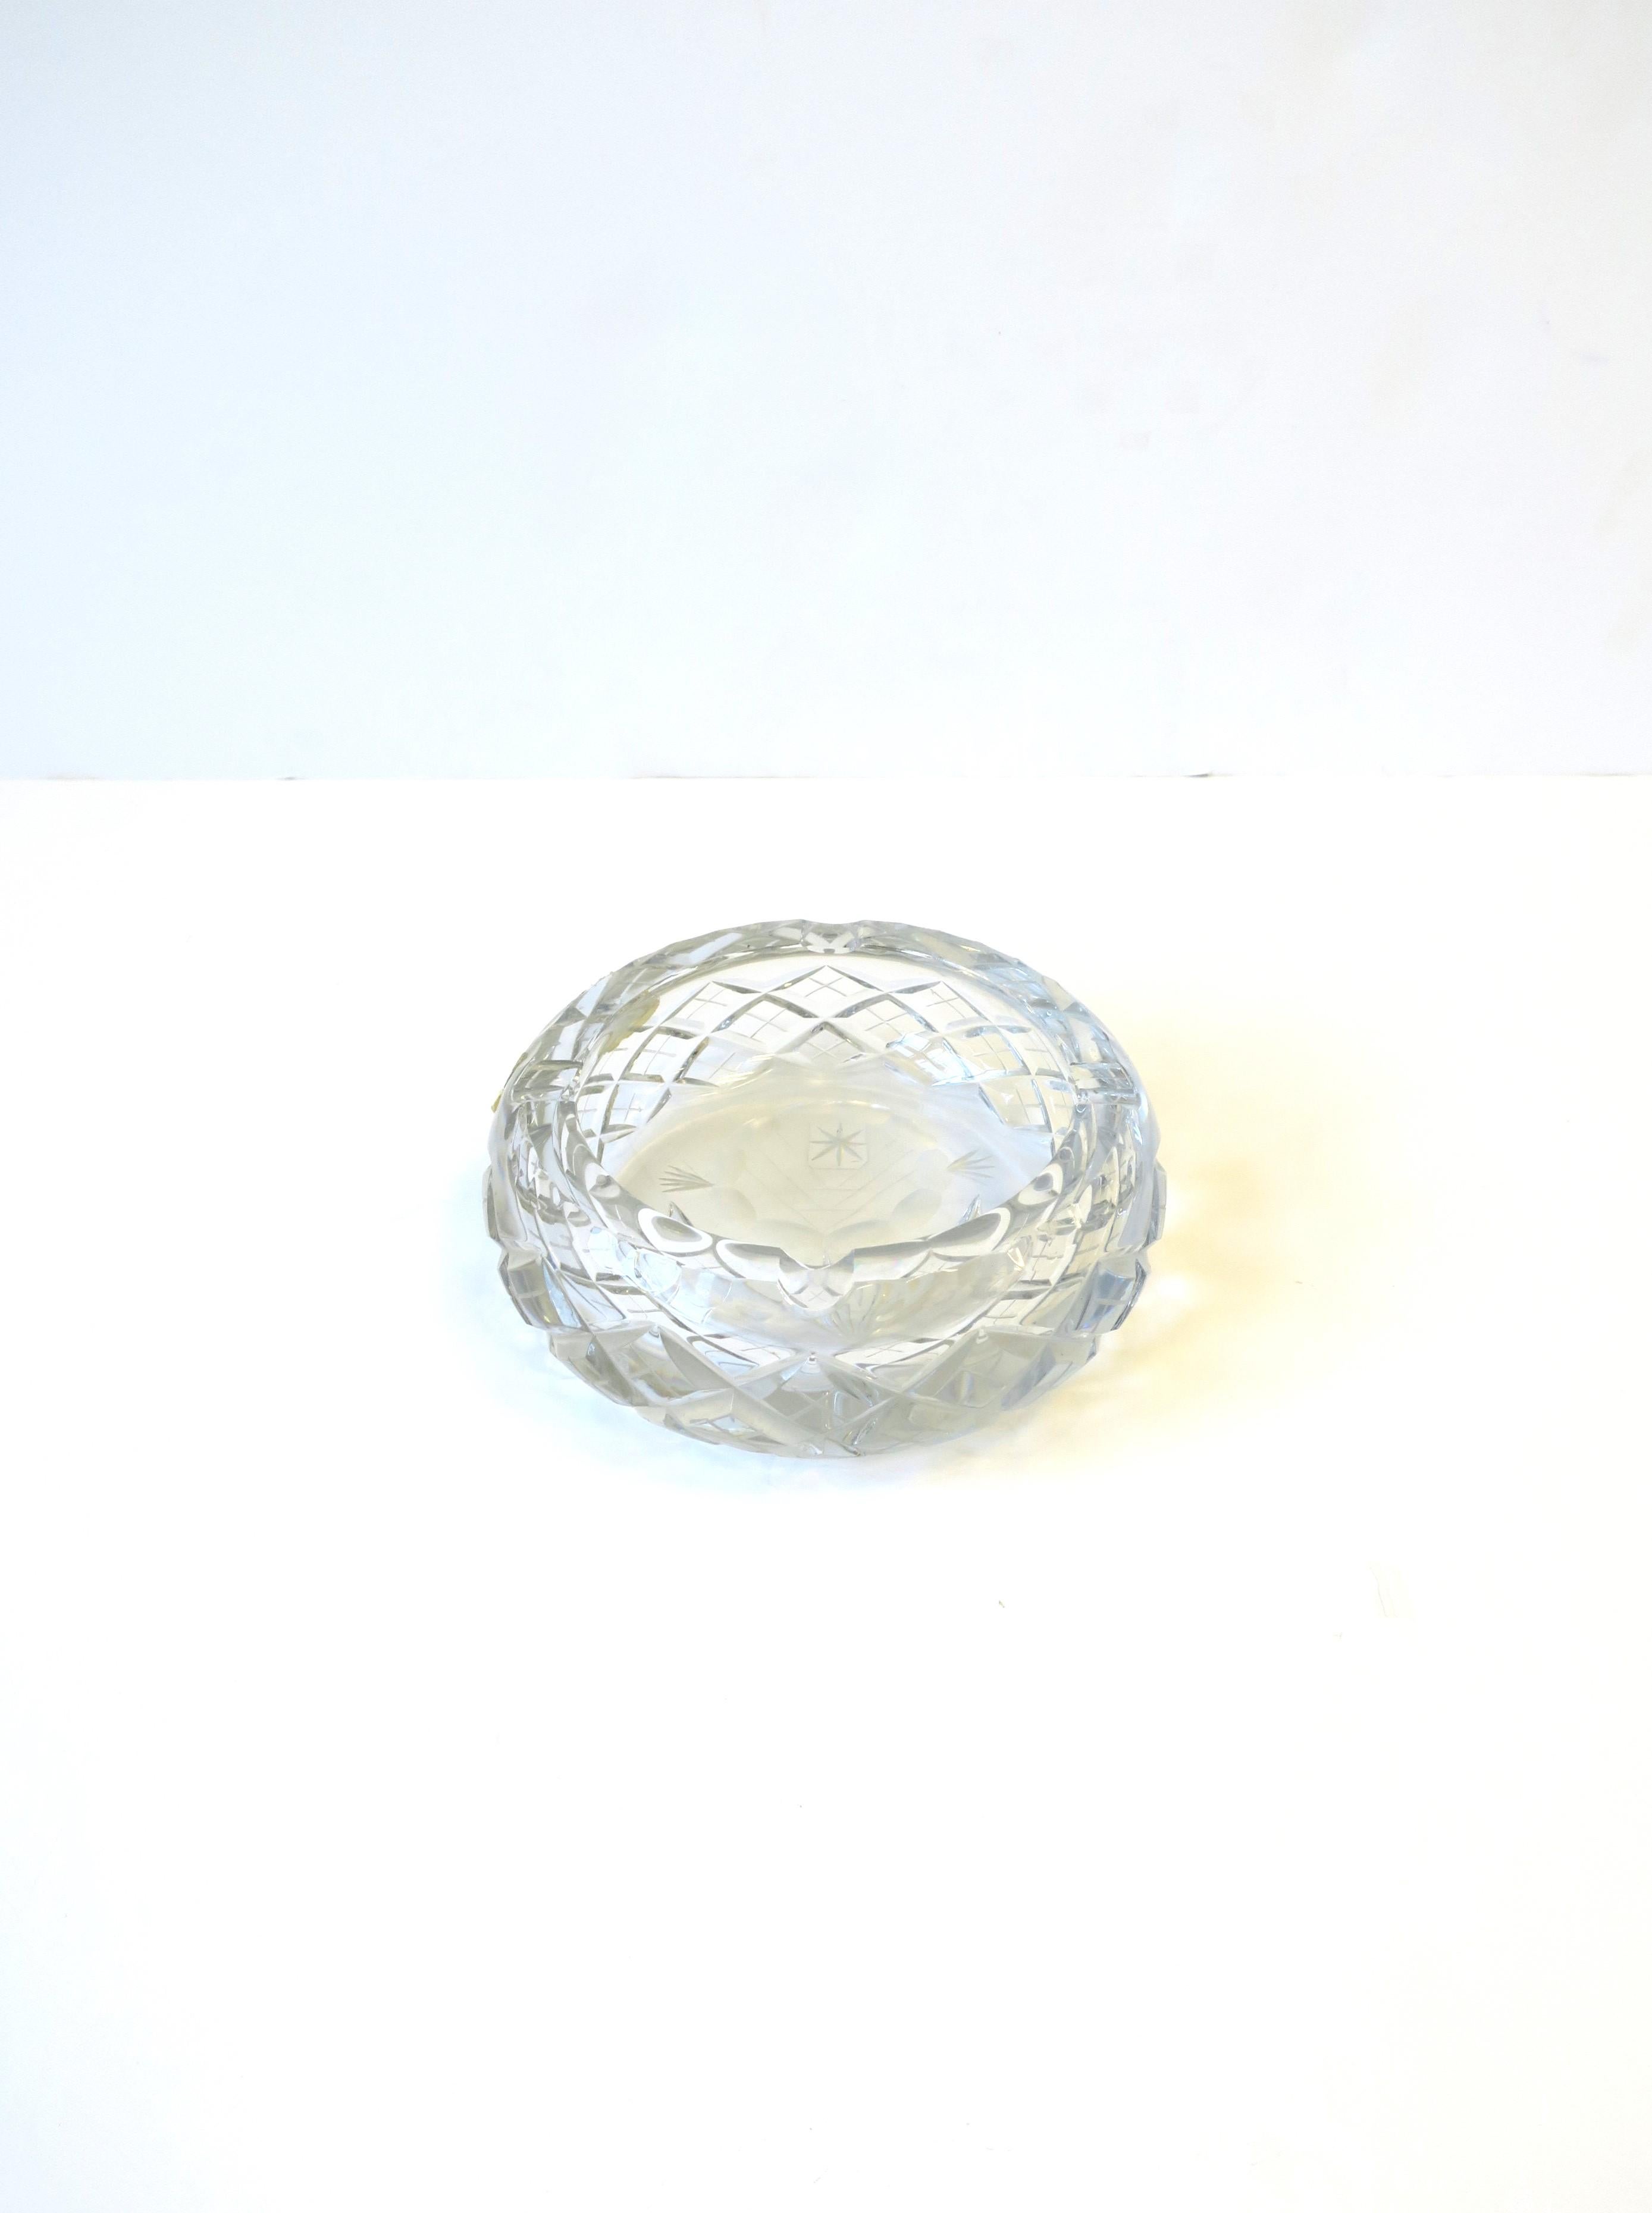 Bohemian Cut Crystal Bowl or Ashtray, Mid-20th, Czech For Sale 1